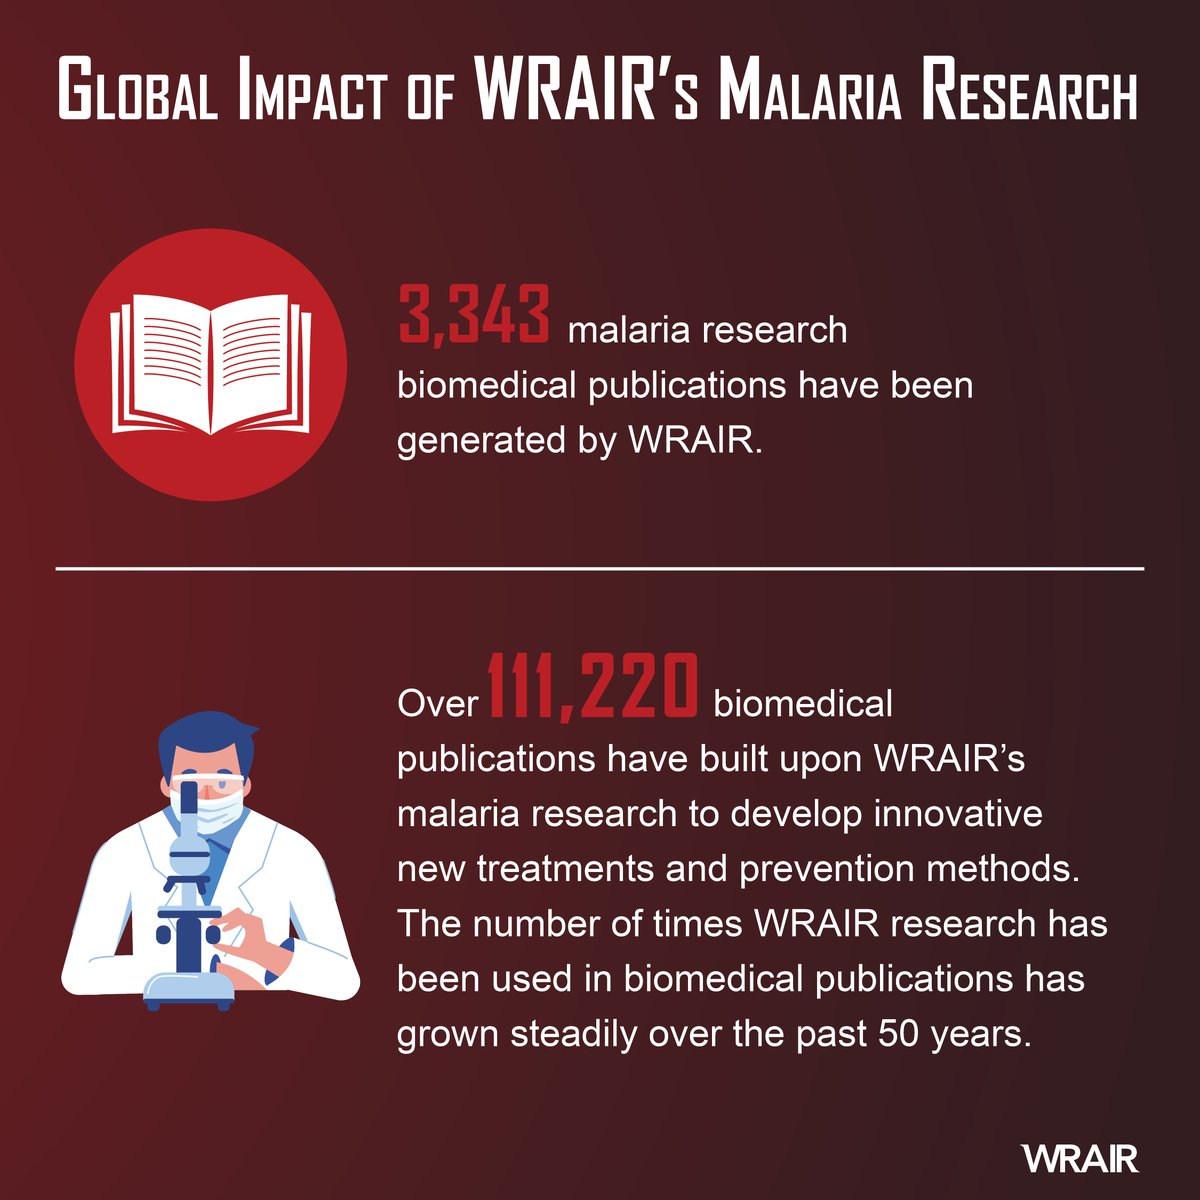 Did you know? WRAIR has contributed to the discovery and development of 100% of all Food and Drug Administration-approved malaria prevention drugs as well as the world’s most advanced malaria vaccine candidates, to include RTS,S. #WorldMarlariaDay